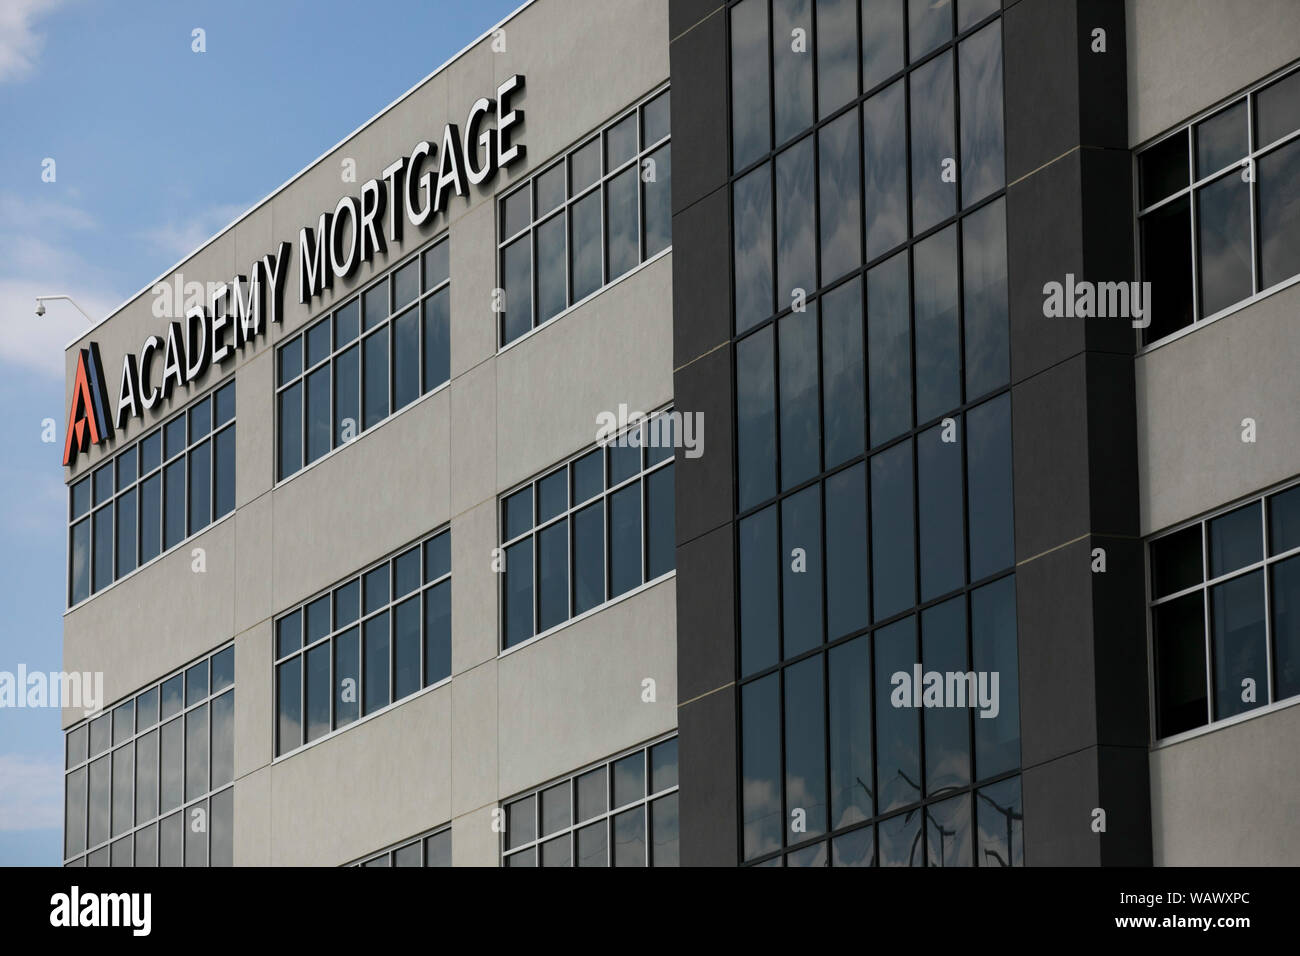 A logo sign outside of a facility occupied by Academy Mortgage in Draper, Utah on July 27, 2019. Stock Photo